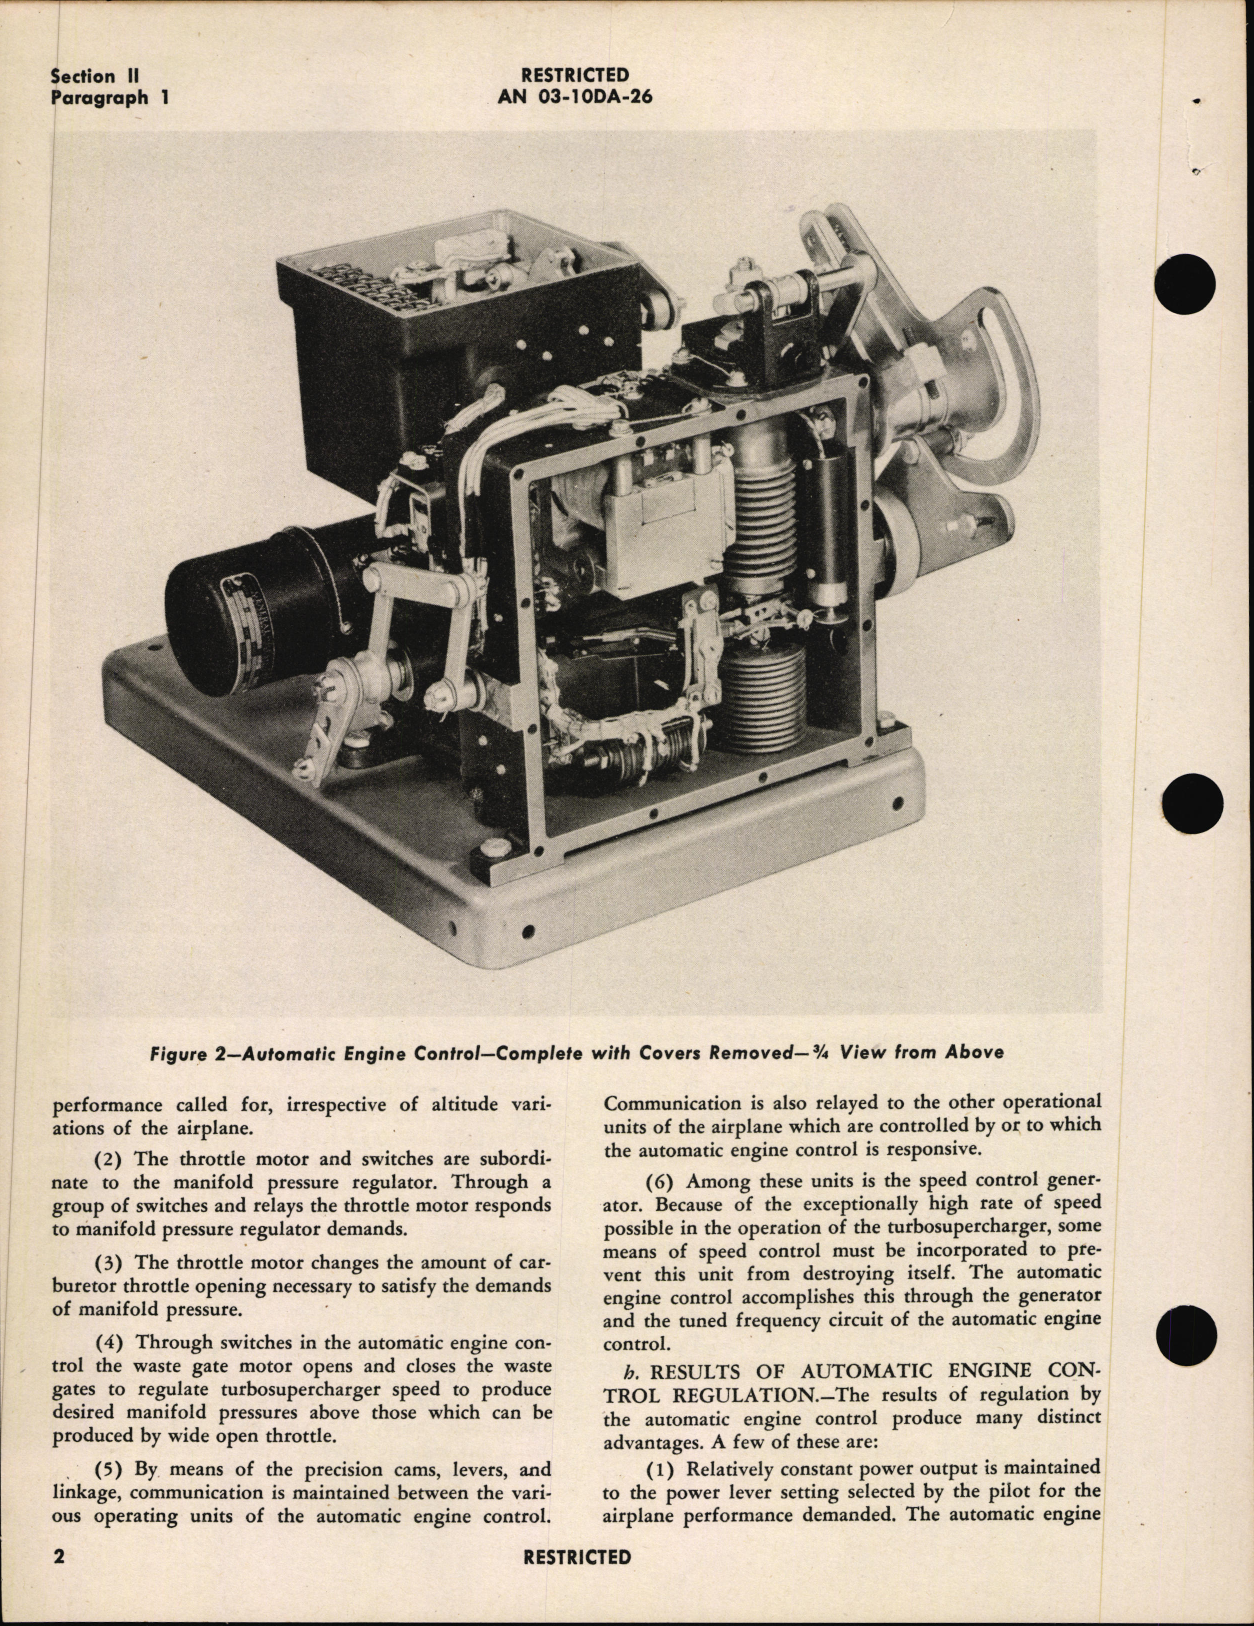 Sample page 6 from AirCorps Library document: Operation, Service, & Overhaul Instructions with Parts Catalog for Automatic Engine Control Type C-1 Model 3GPC1A1